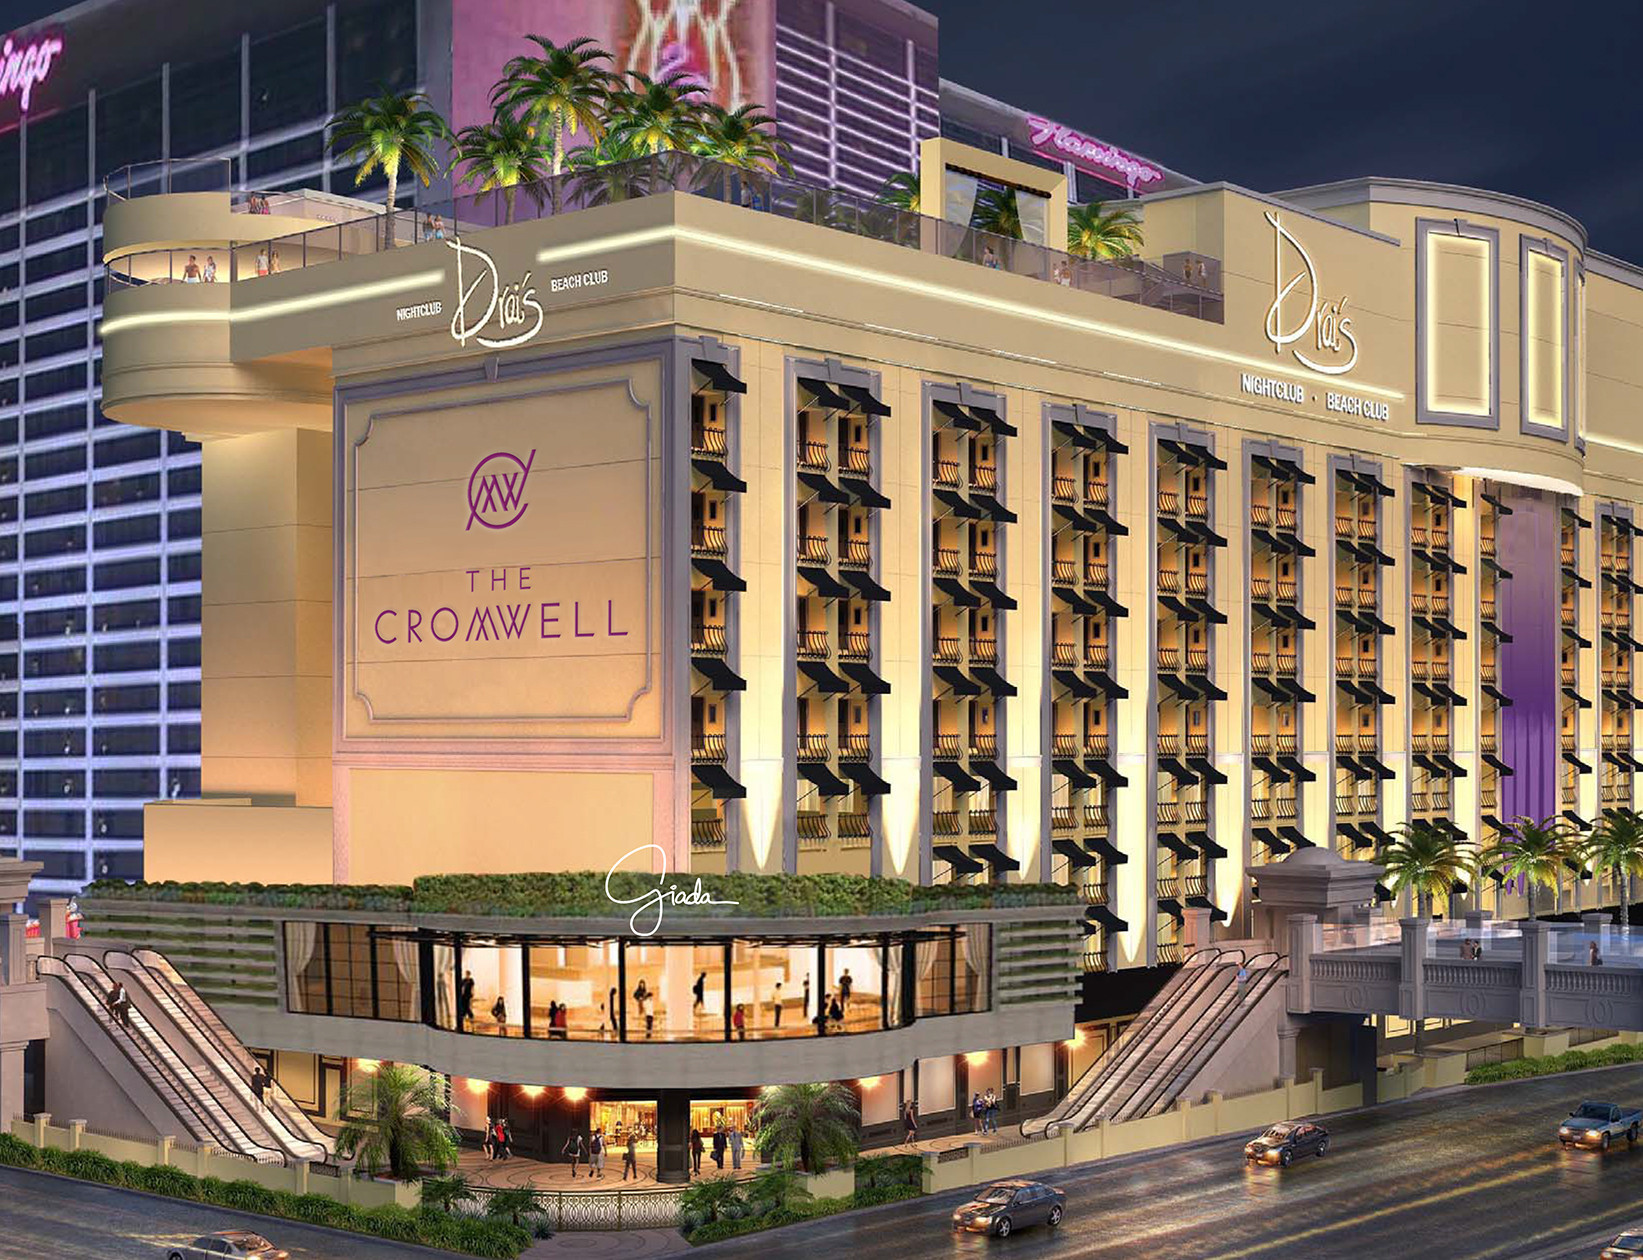 Las Vegas Sports Book News No Sports Book For The New Cromwell The Vegas Parlay